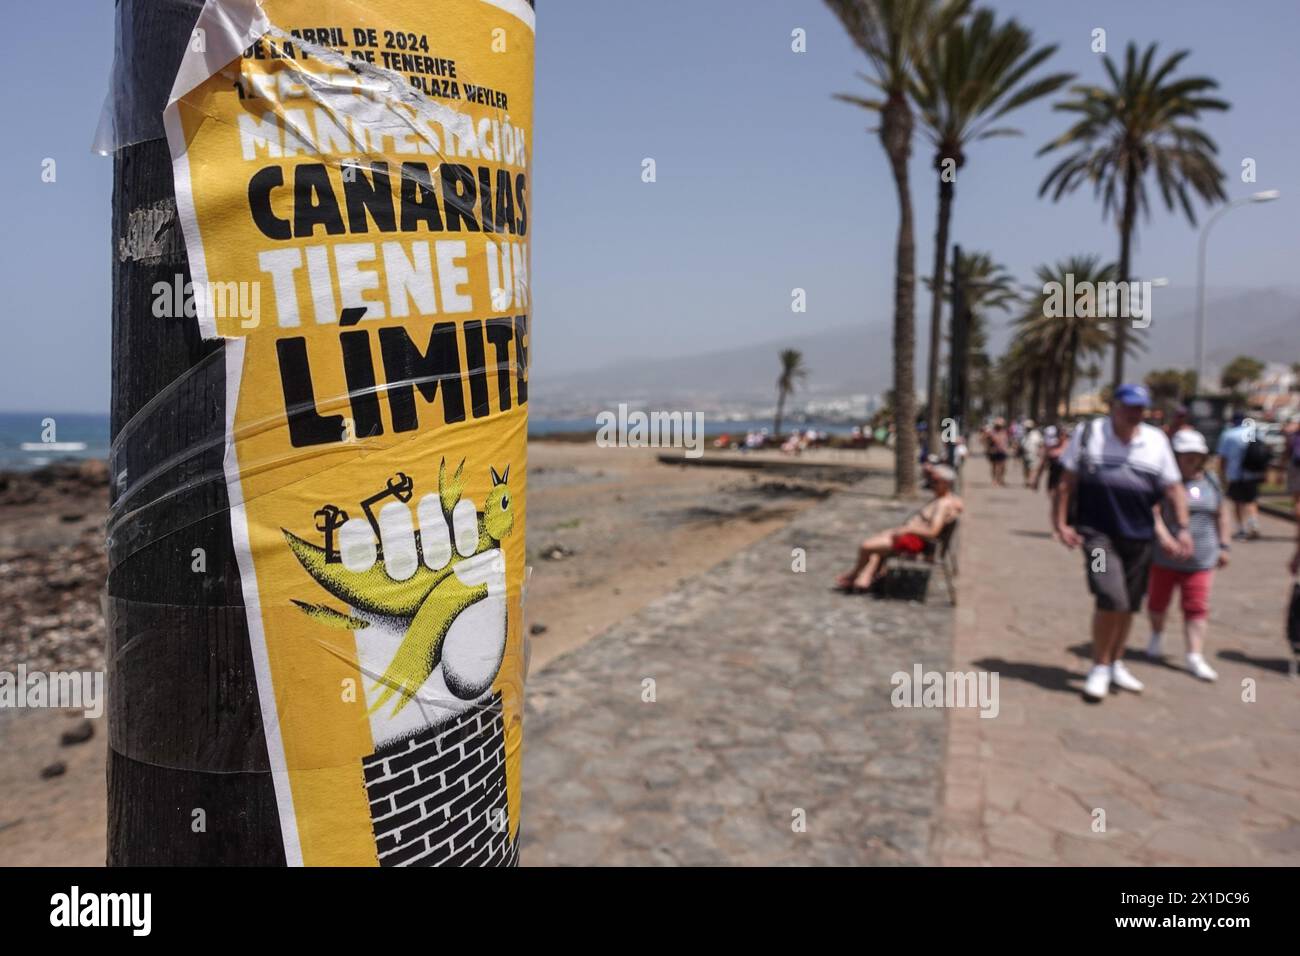 Los Cristianos, Tenerife, April 16th 2024 - Tourists walk past Anti-Tourist posters along the beach front in Los Cristianos. The poster reads that 'Canary Islands Have a Limit' the yellow signs advertise the anti-tourist protest on Saturday 20th April. in Santa Cruz de Tenerife. Parking is also a big problem in the area as hordes of visitors fill thousands of spaces, causing a headache for residents and visitors alike. Credit: Stop Press Media/Alamy Live News Stock Photo